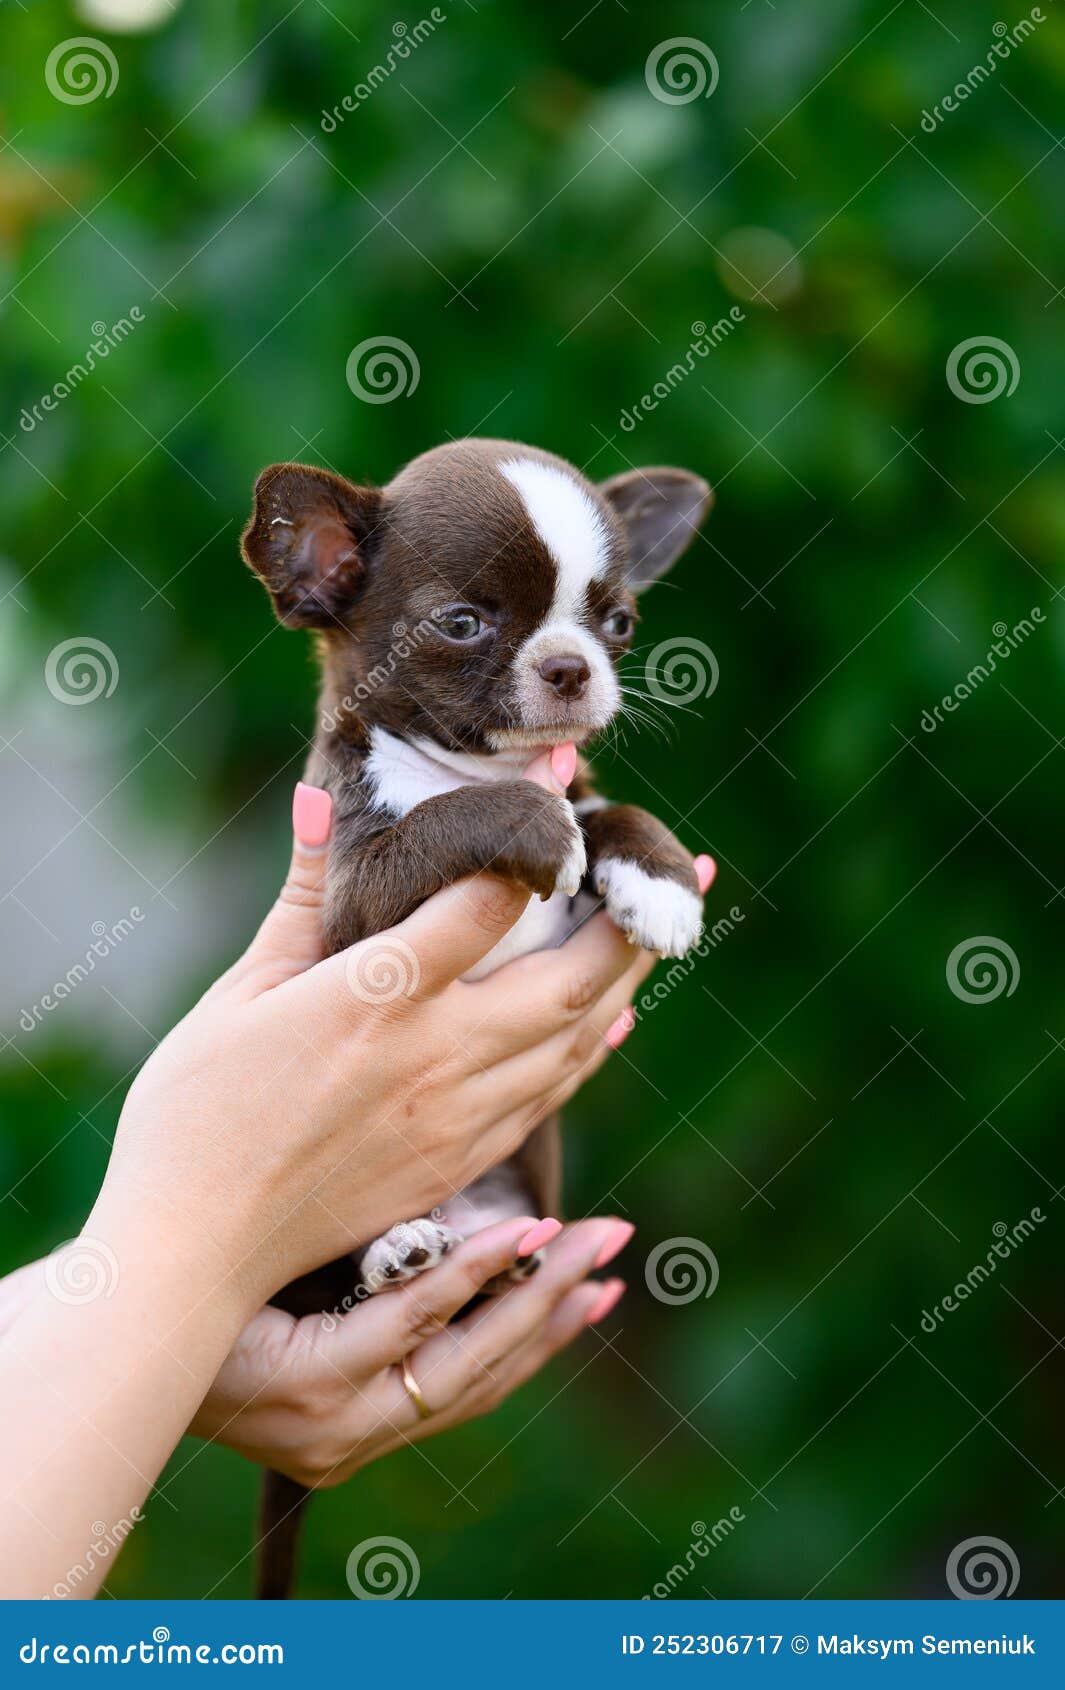 Chihuahua Puppy Brown-white in Female Hands on Natural Green Background Stock Image - Image of foster: 252306717